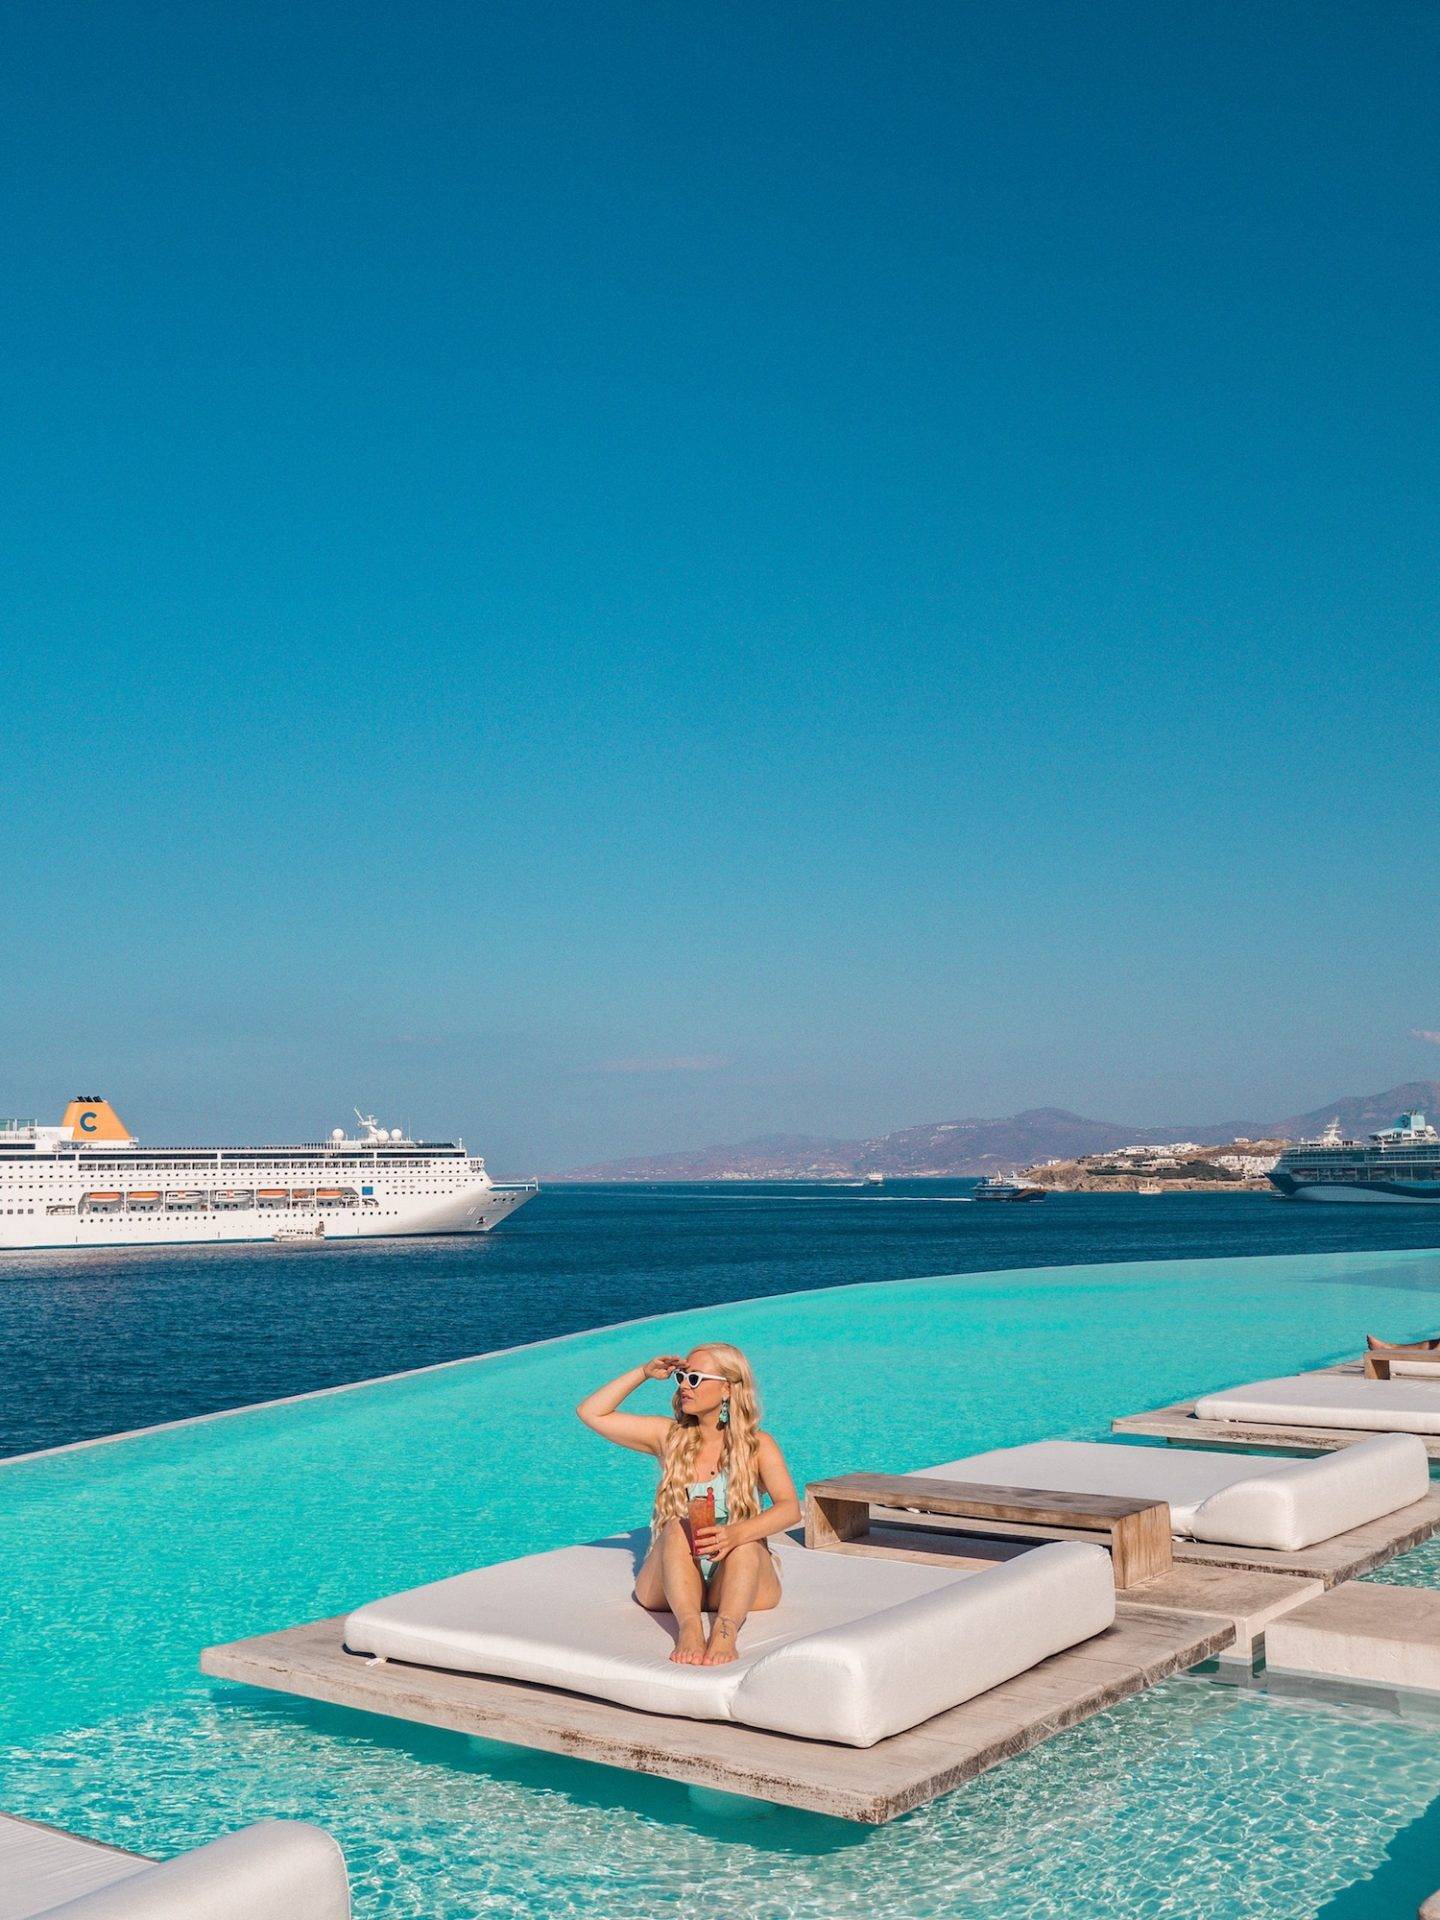 Cavo Tagoo is one of the most instagrammable places in Mykonos. Click the photo to see the rest of my list of the most instagrammable places in Mykonos! 